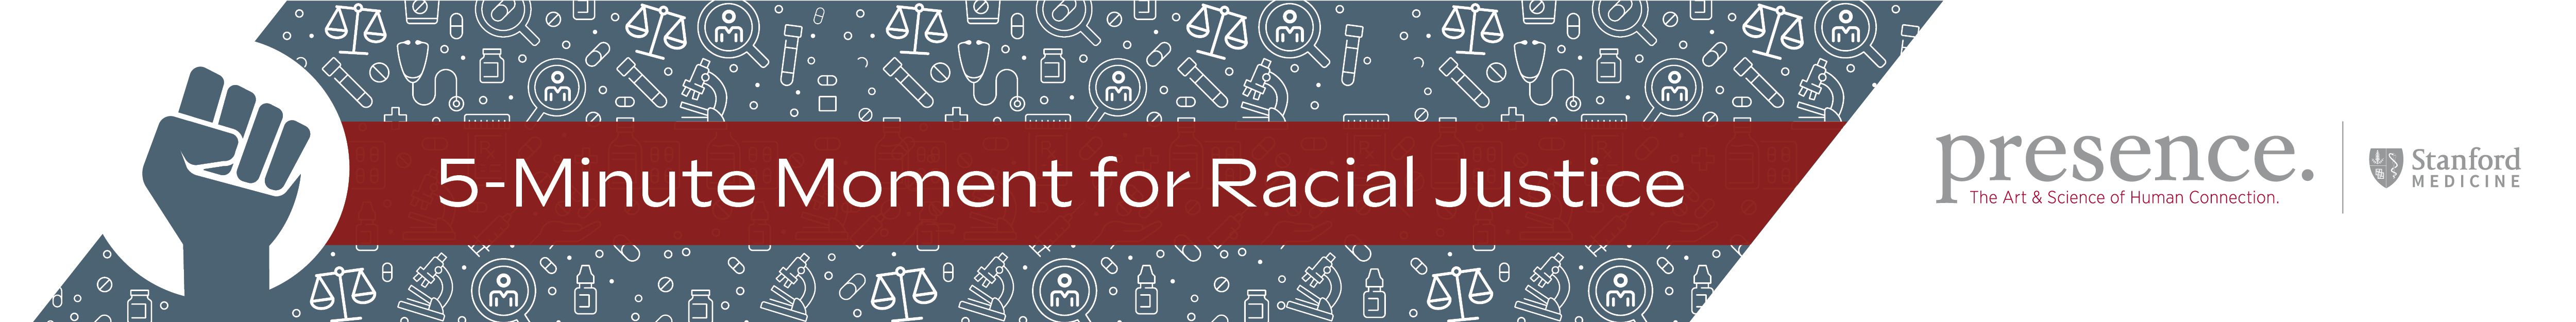 5 Minute Moment for Racial Justice in Healthcare Series - Pulse Oximetry Banner